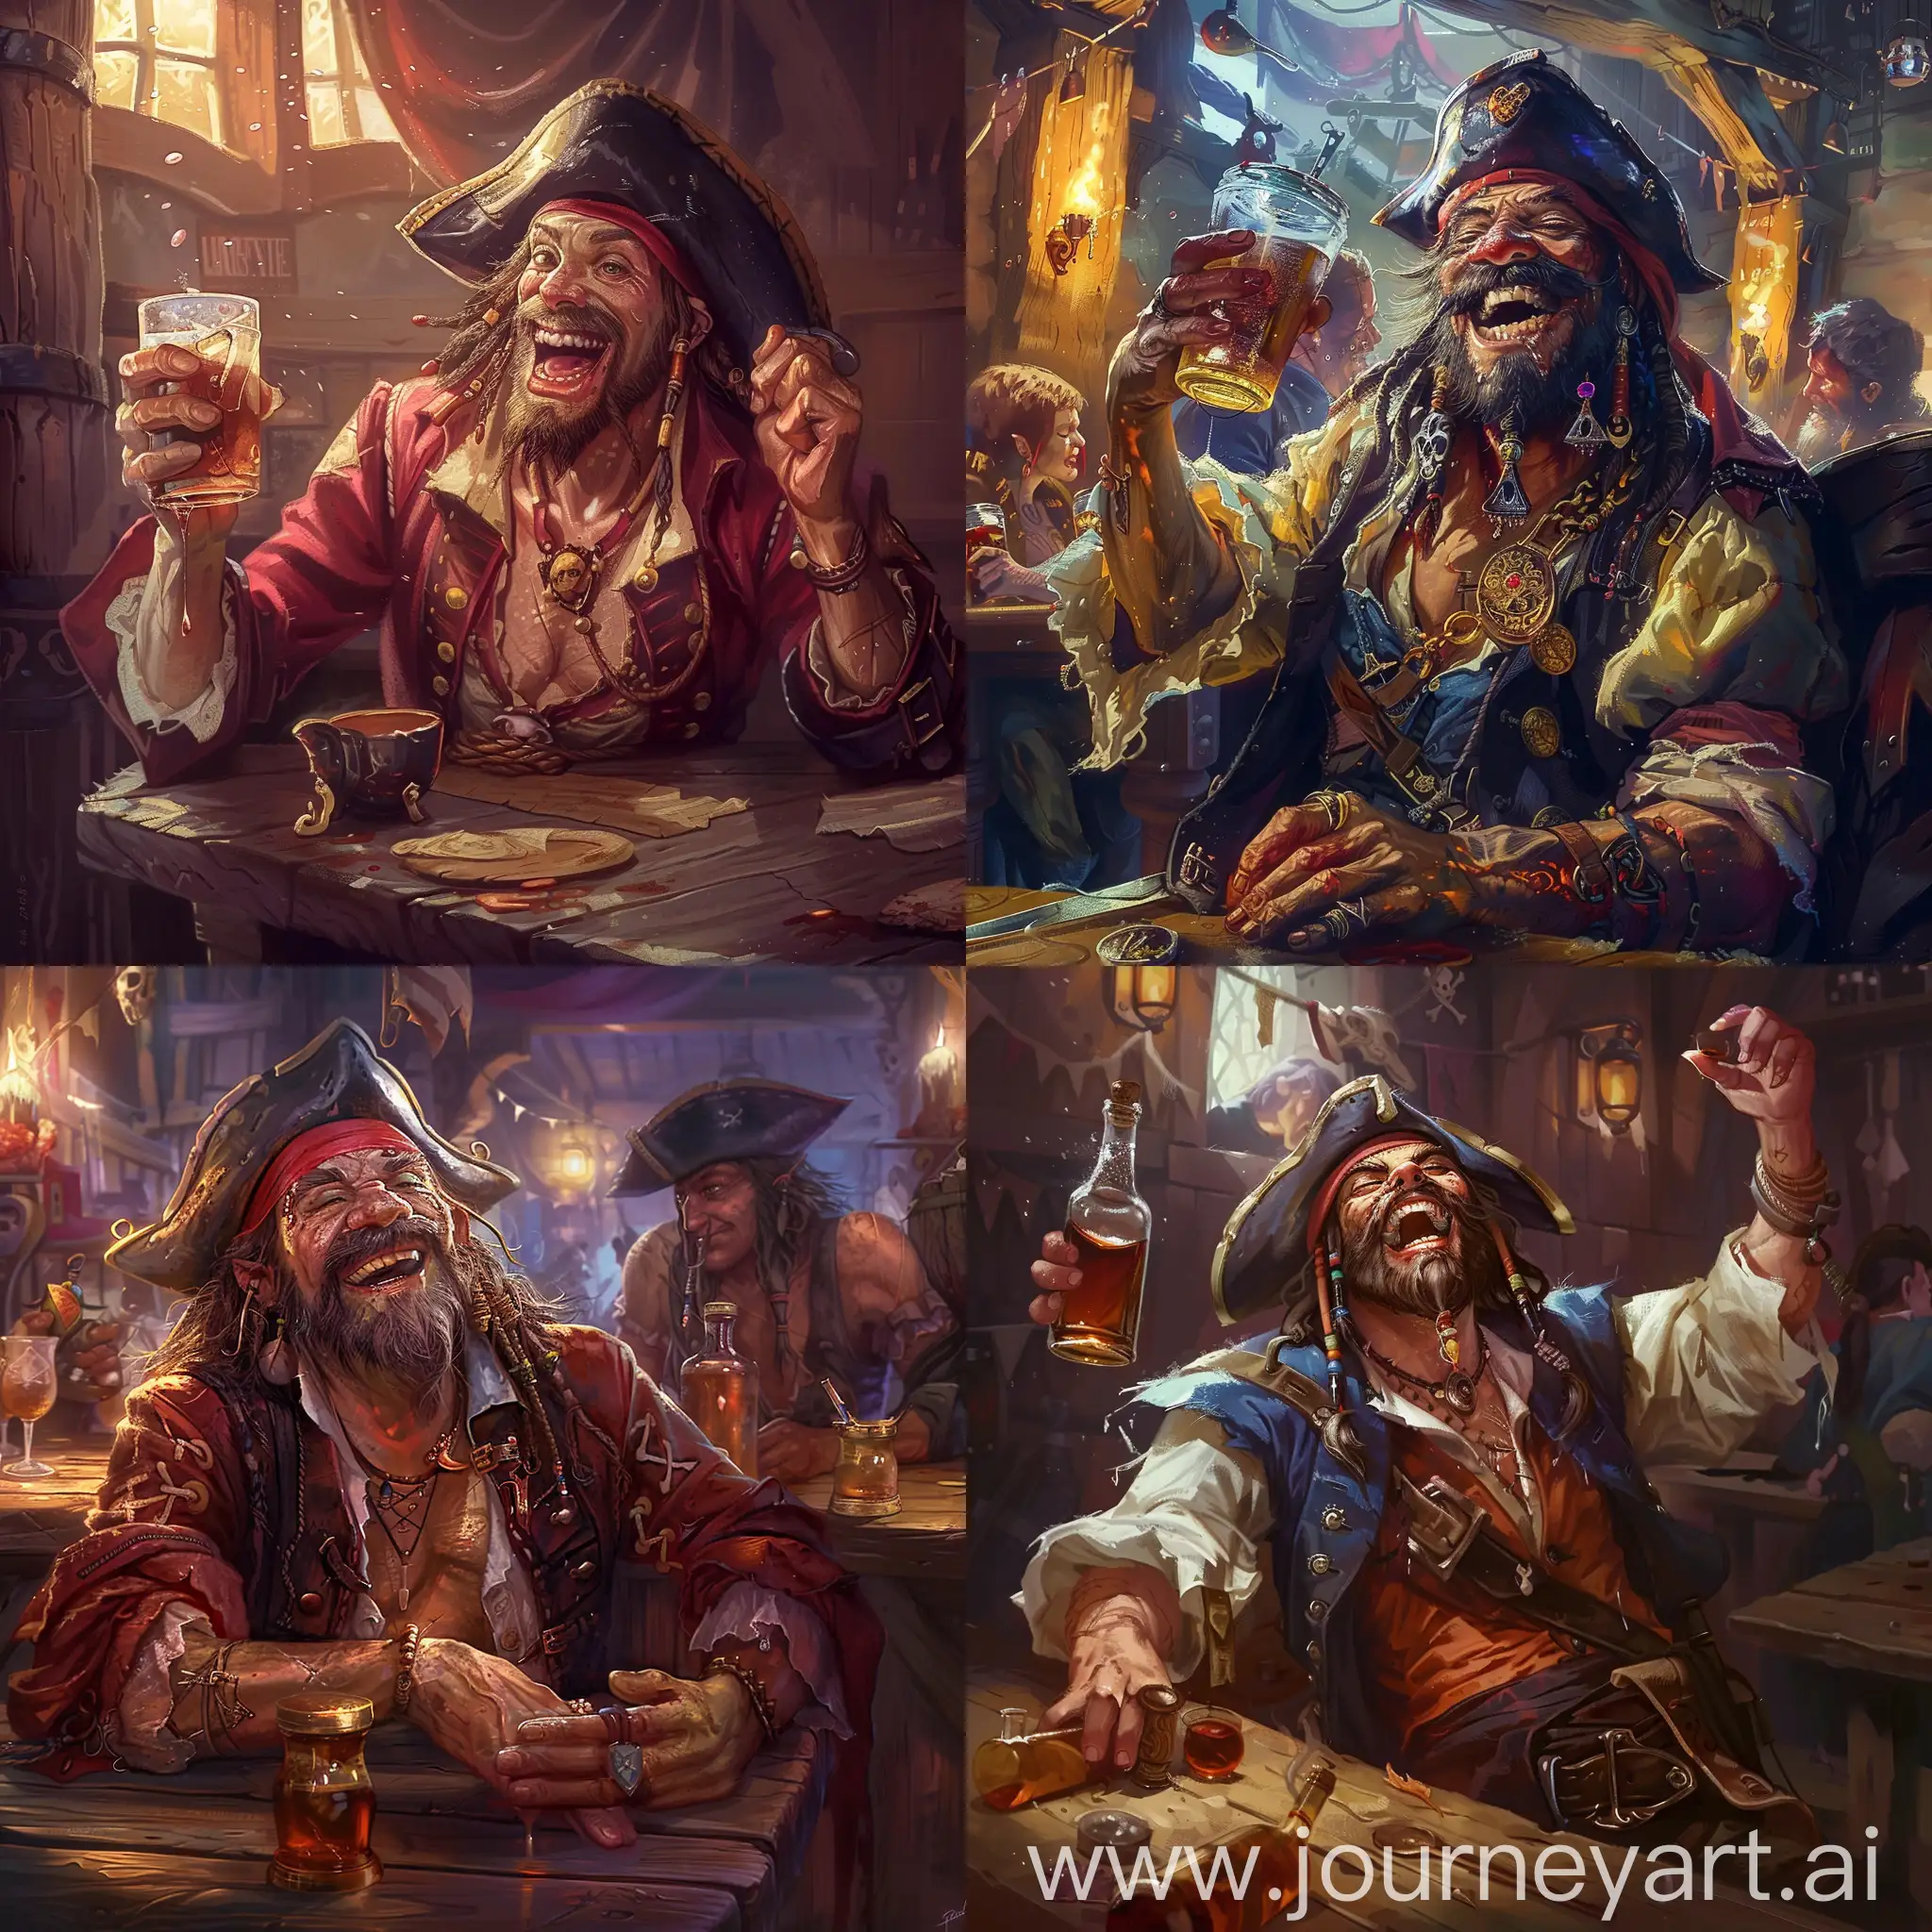 pirate, drunk, cheerful, in a tavern, without drink and alcohol, just drunk pirate in tavern, fantasy style